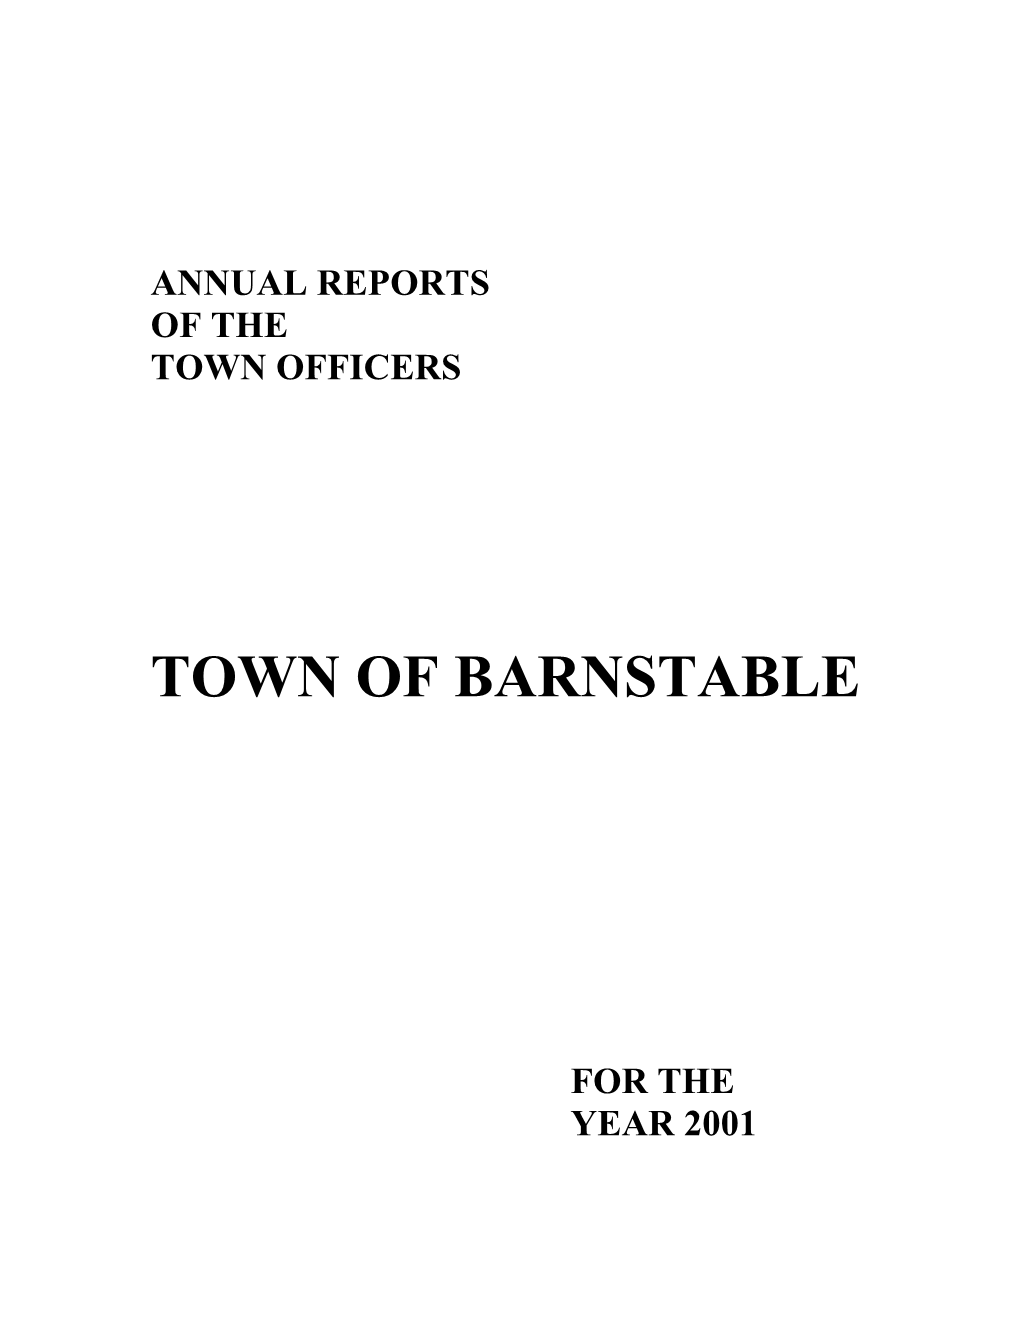 Town of Barnstable